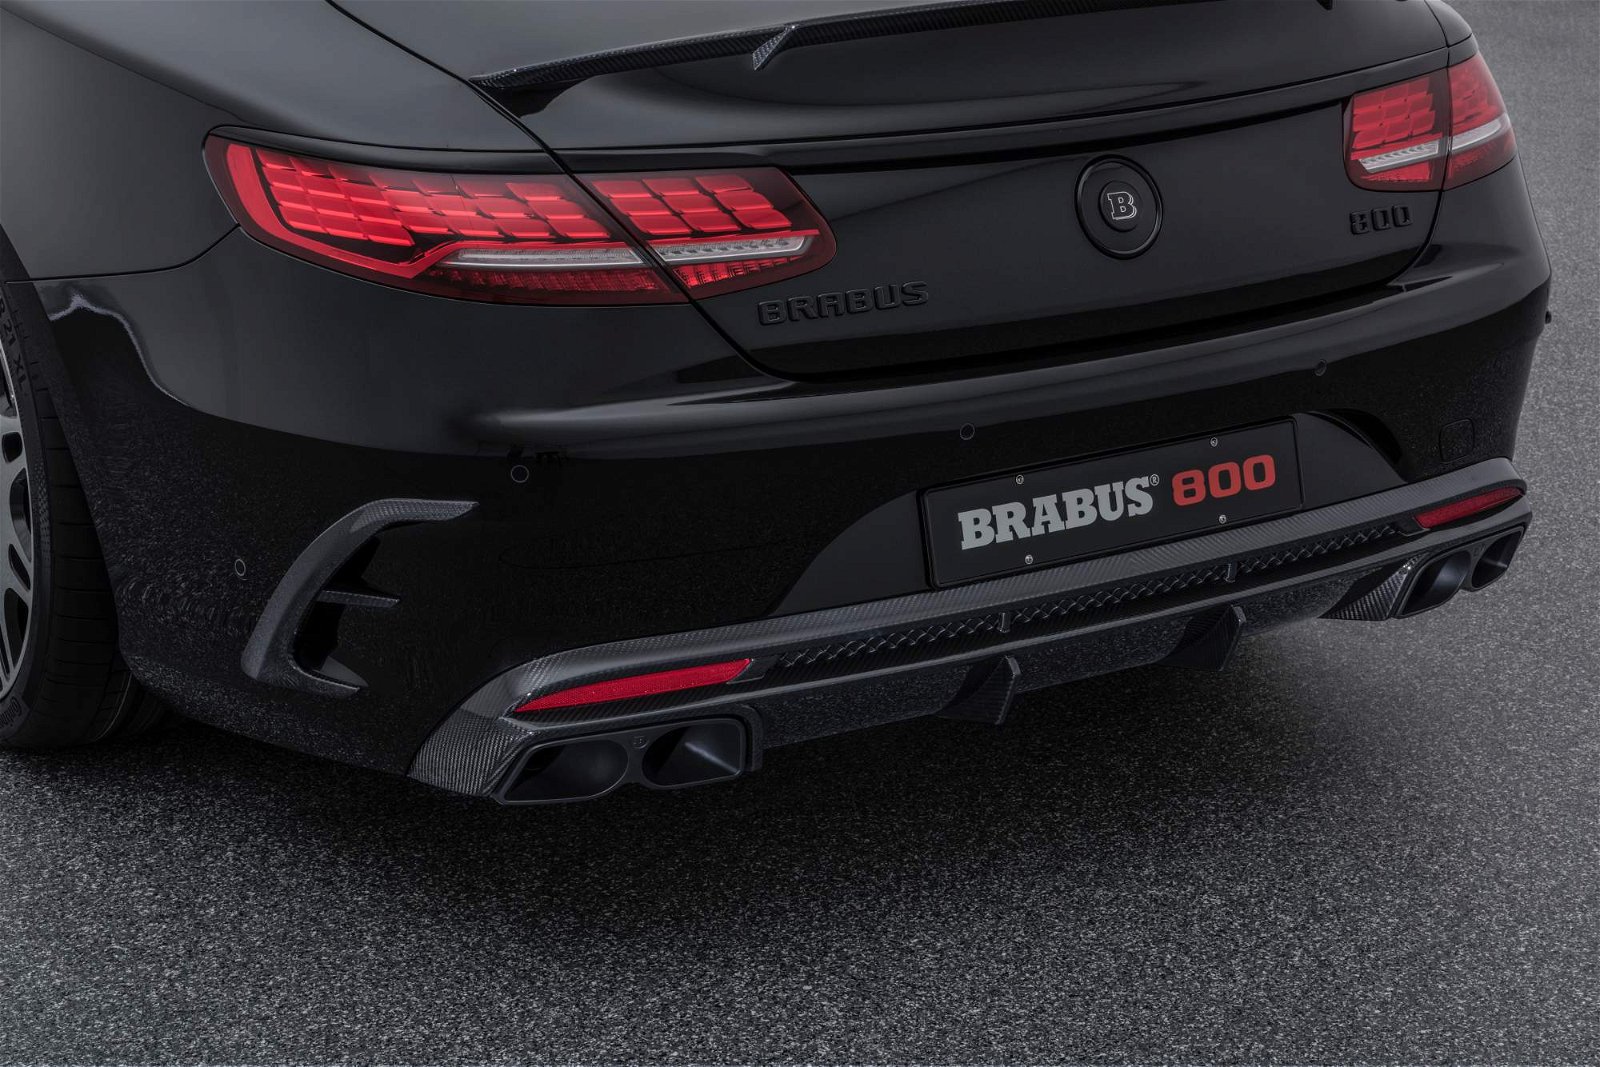 Brabus-800-based-on-Mercedes-AMG-S63-4MATIC+-Coupe-11